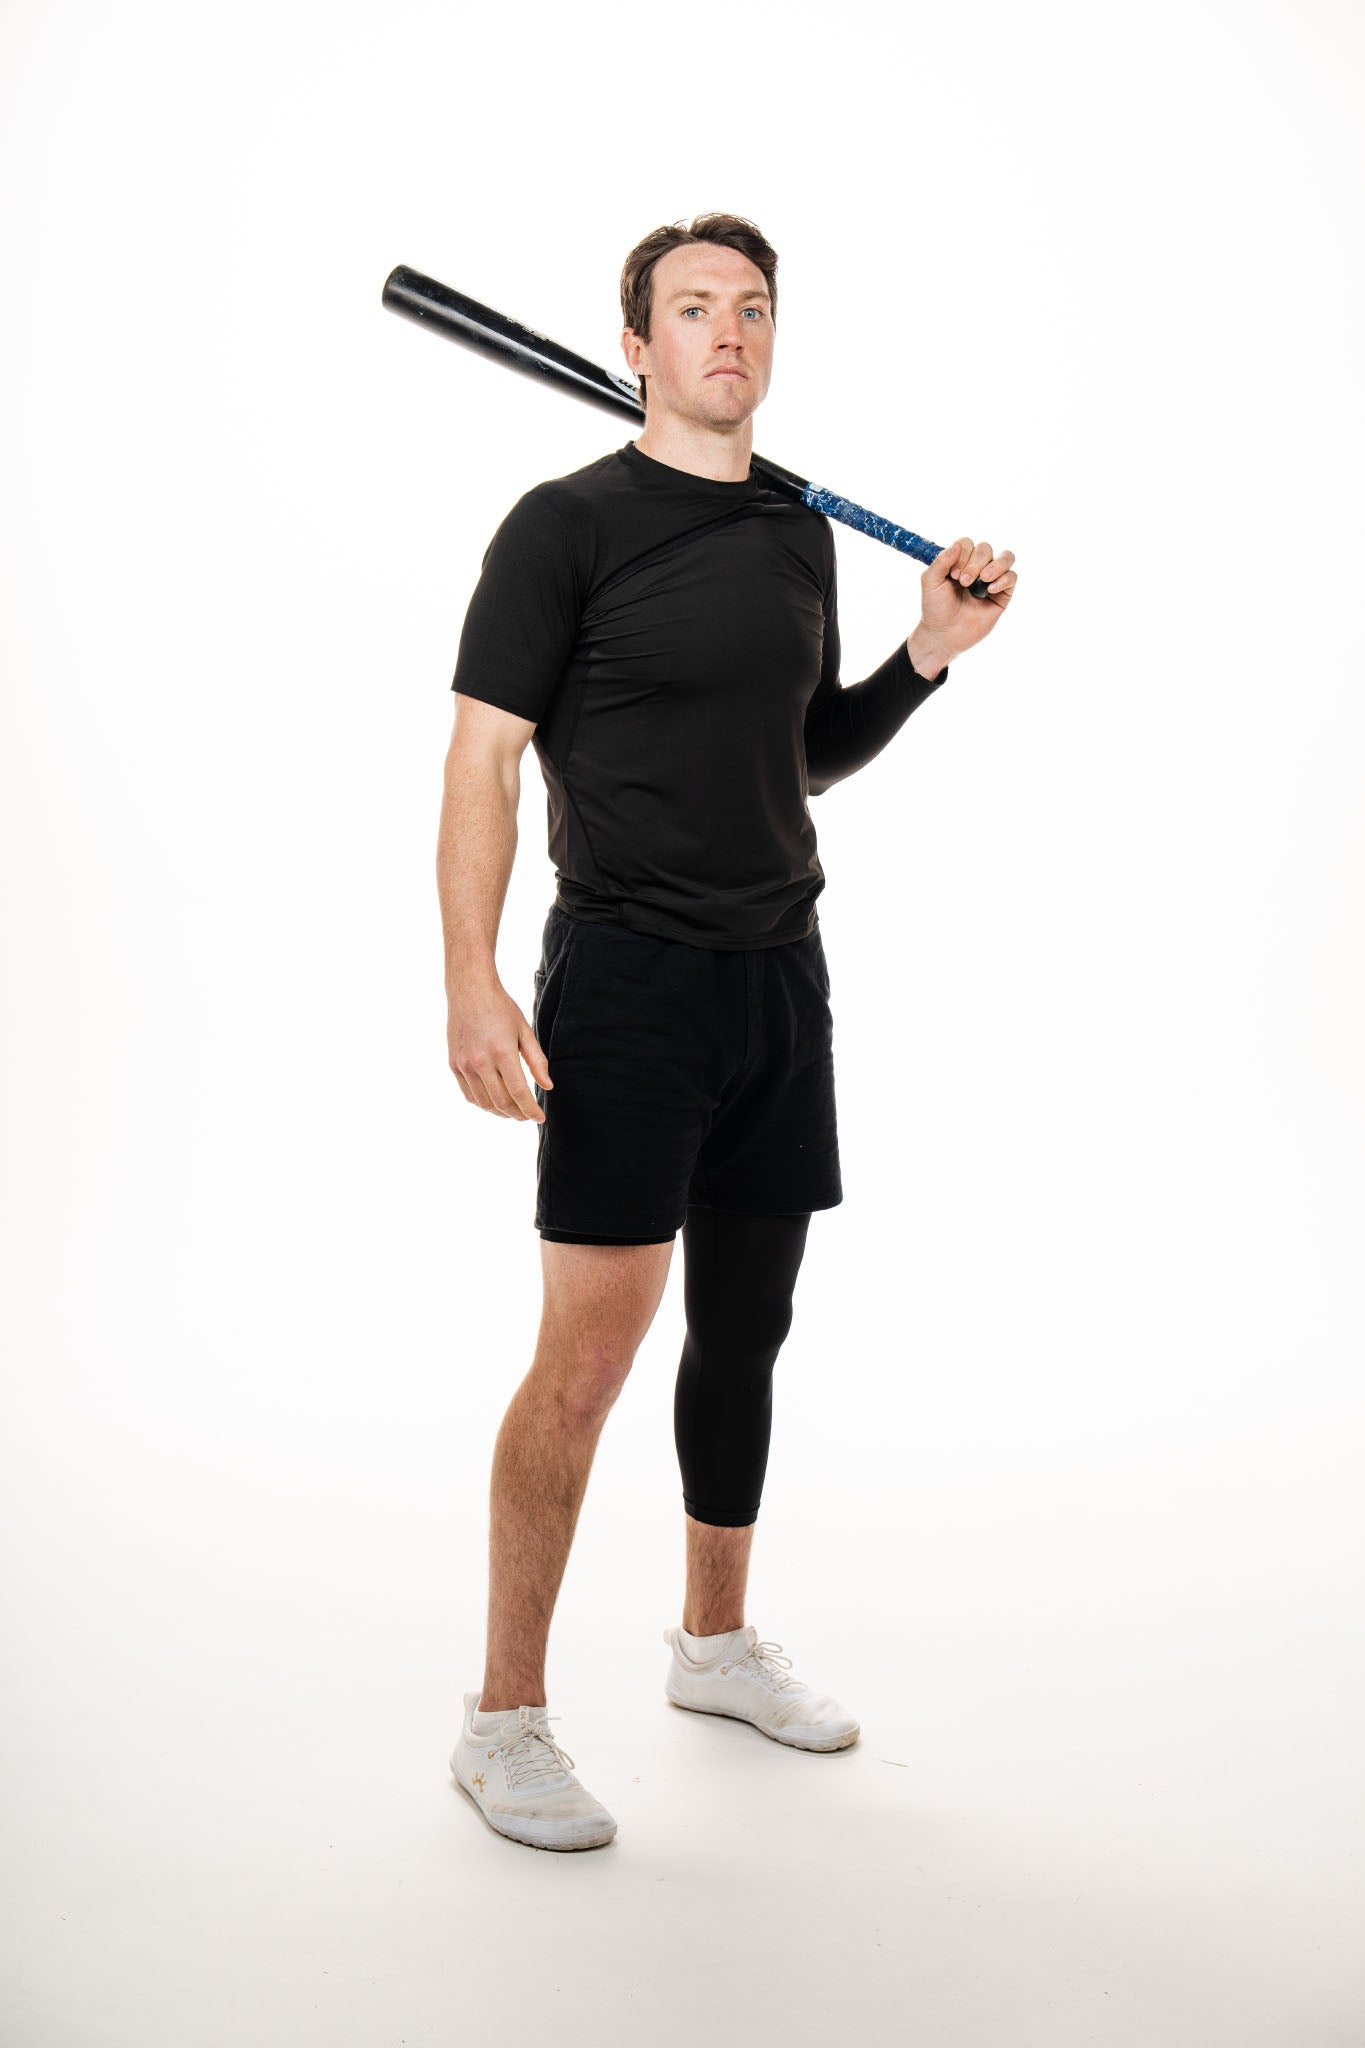 Single Leg Tights or One Leg Compression: Which is Correct? – LVLS